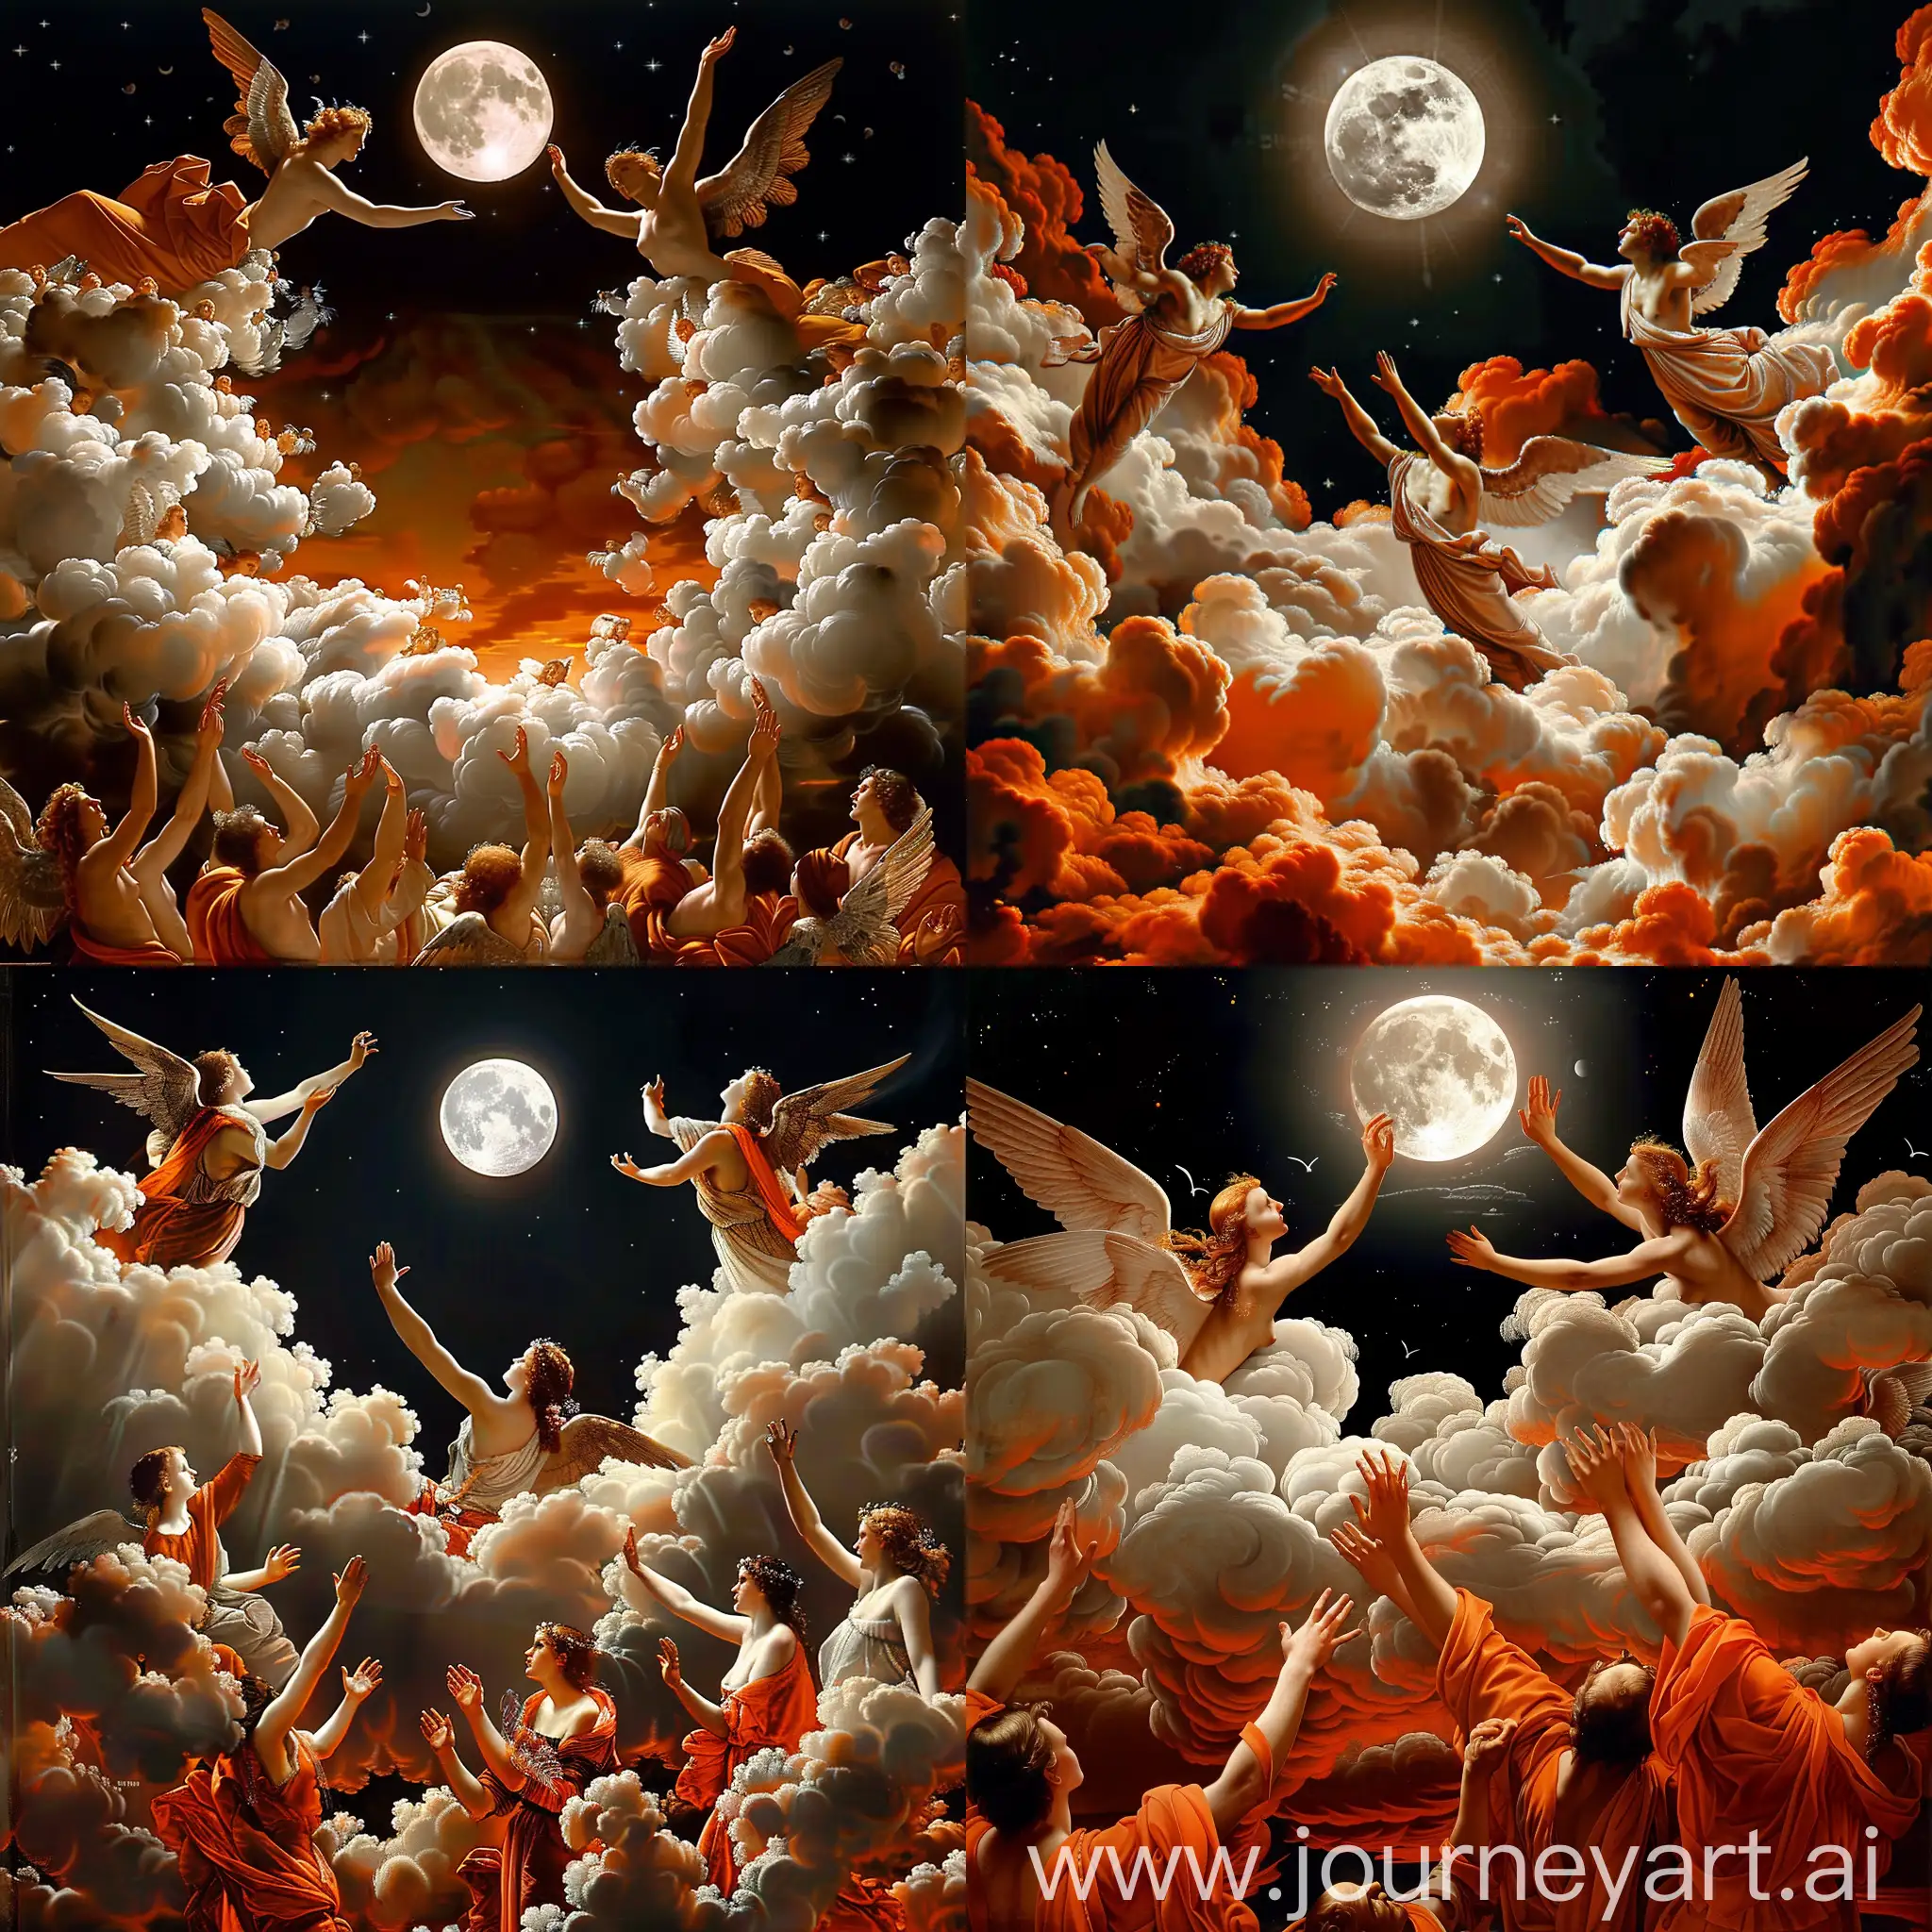 Renaissance-Painting-Human-World-Ascending-to-Night-Sky-with-Angels-and-Moon